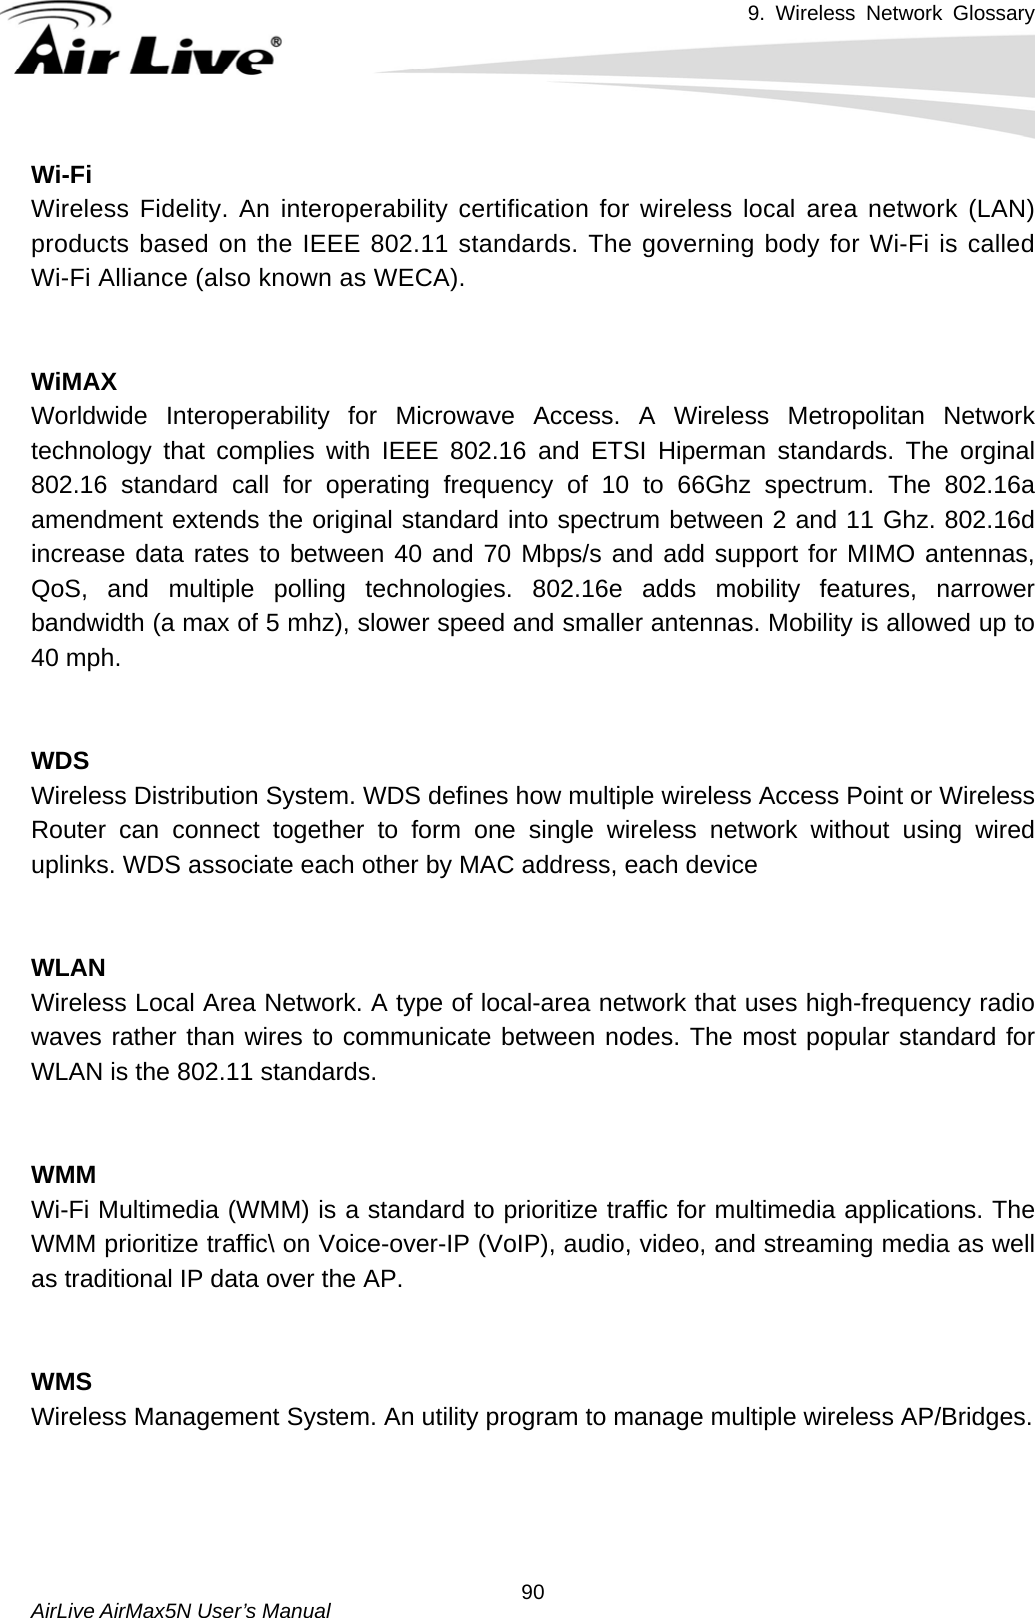 9. Wireless Network Glossary       AirLive AirMax5N User’s Manual  90Wi-Fi Wireless Fidelity. An interoperability certification for wireless local area network (LAN) products based on the IEEE 802.11 standards. The governing body for Wi-Fi is called Wi-Fi Alliance (also known as WECA).   WiMAXWorldwide Interoperability for Microwave Access. A Wireless Metropolitan Network technology that complies with IEEE 802.16 and ETSI Hiperman standards. The orginal 802.16 standard call for operating frequency of 10 to 66Ghz spectrum. The 802.16a amendment extends the original standard into spectrum between 2 and 11 Ghz. 802.16d increase data rates to between 40 and 70 Mbps/s and add support for MIMO antennas, QoS, and multiple polling technologies. 802.16e adds mobility features, narrower bandwidth (a max of 5 mhz), slower speed and smaller antennas. Mobility is allowed up to 40 mph.     WDSWireless Distribution System. WDS defines how multiple wireless Access Point or Wireless Router can connect together to form one single wireless network without using wired uplinks. WDS associate each other by MAC address, each device     WLANWireless Local Area Network. A type of local-area network that uses high-frequency radio waves rather than wires to communicate between nodes. The most popular standard for WLAN is the 802.11 standards.   WMMWi-Fi Multimedia (WMM) is a standard to prioritize traffic for multimedia applications. The WMM prioritize traffic\ on Voice-over-IP (VoIP), audio, video, and streaming media as well as traditional IP data over the AP.   WMSWireless Management System. An utility program to manage multiple wireless AP/Bridges.     